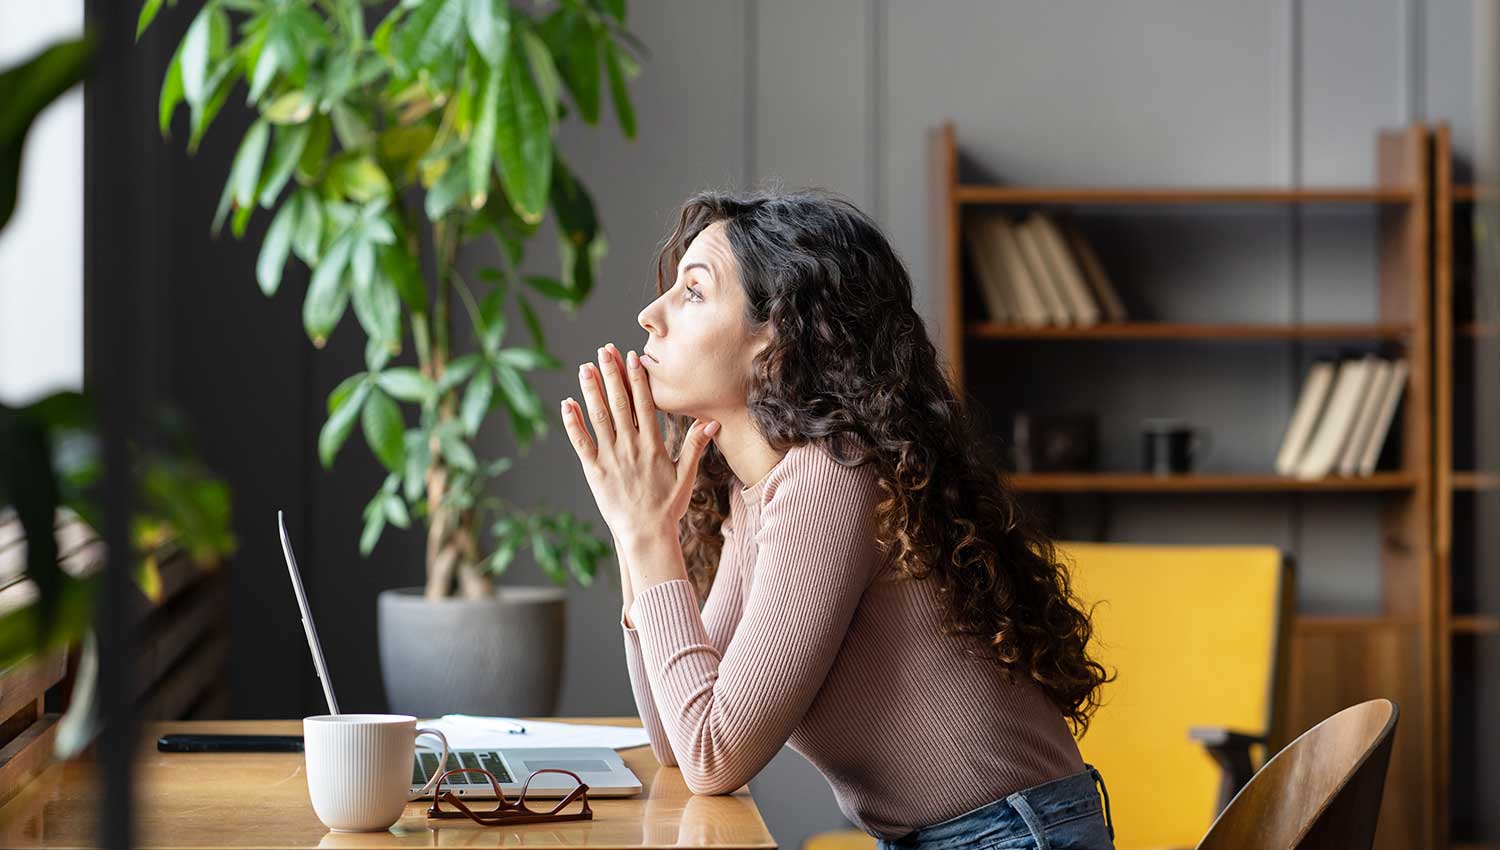 A distraught woman looks out the window while taking a break from working at her laptop. An indoor tree sits behind her. She's wearing a brown top tucked into jeans, and her hair is long and dark brown.